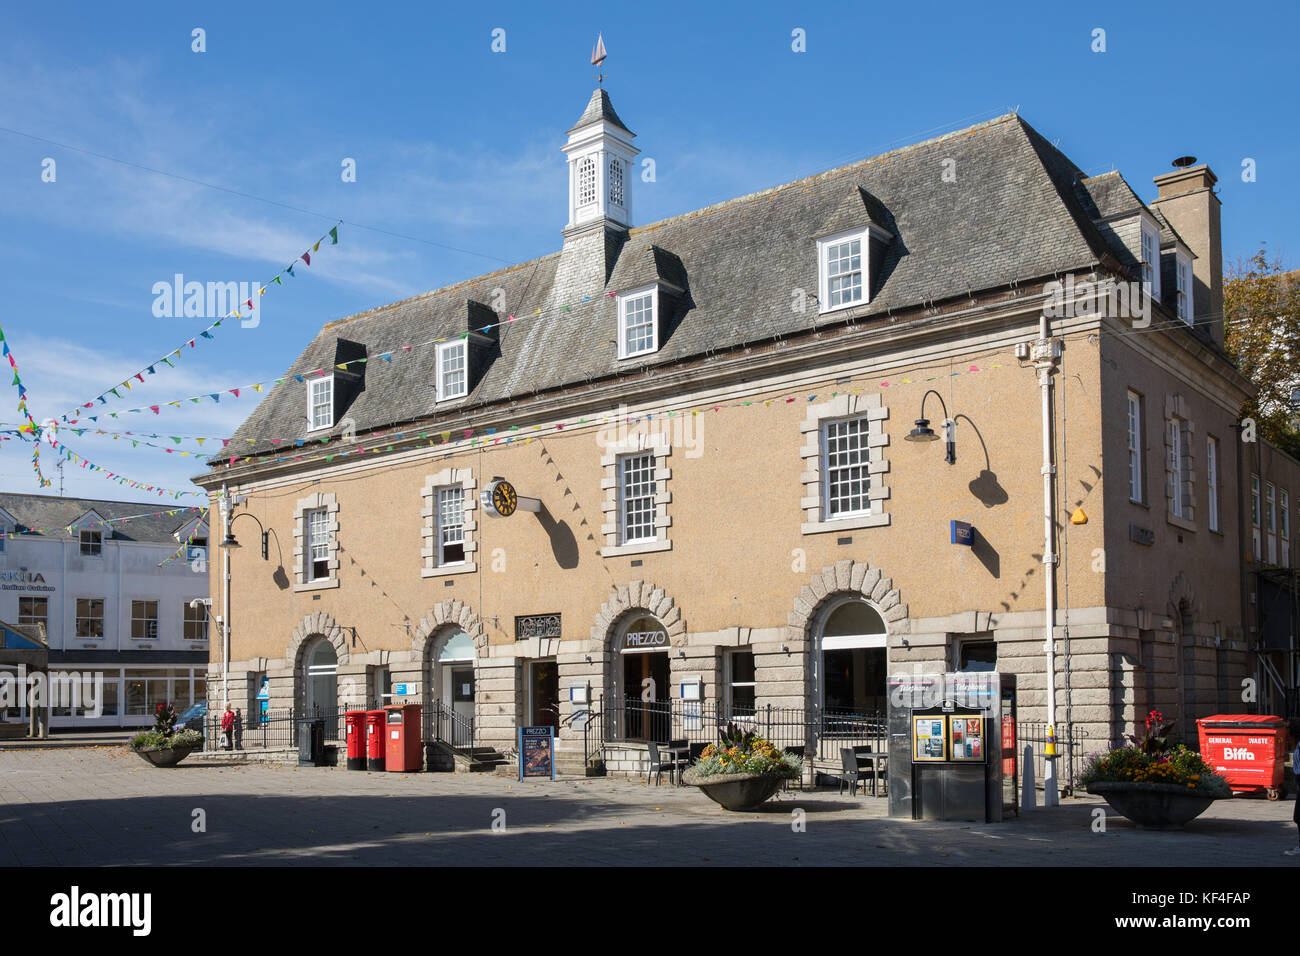 The Old Post office building in Falmouth, Cornwall, Uk Stock Photo